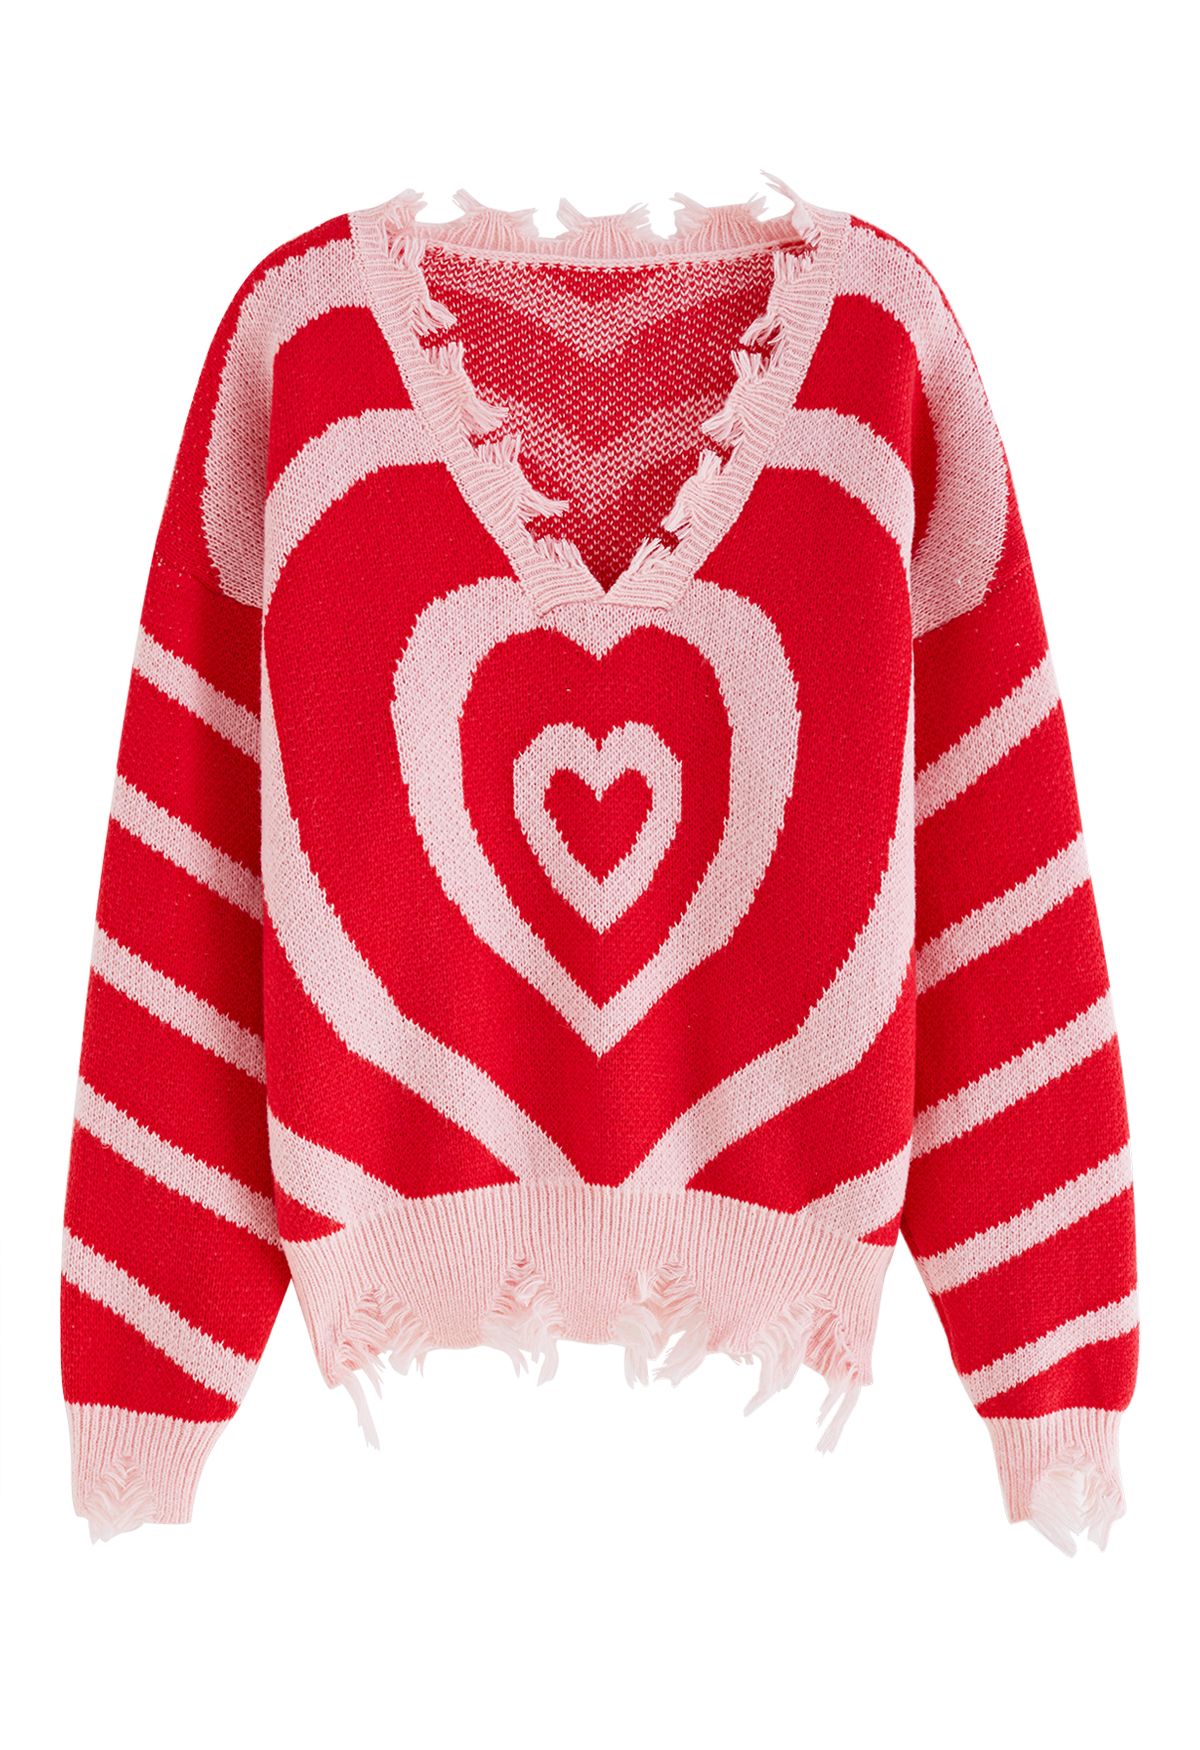 Multilayer Heart Frayed Edge Knit Sweater in Red - Retro, Indie and ...